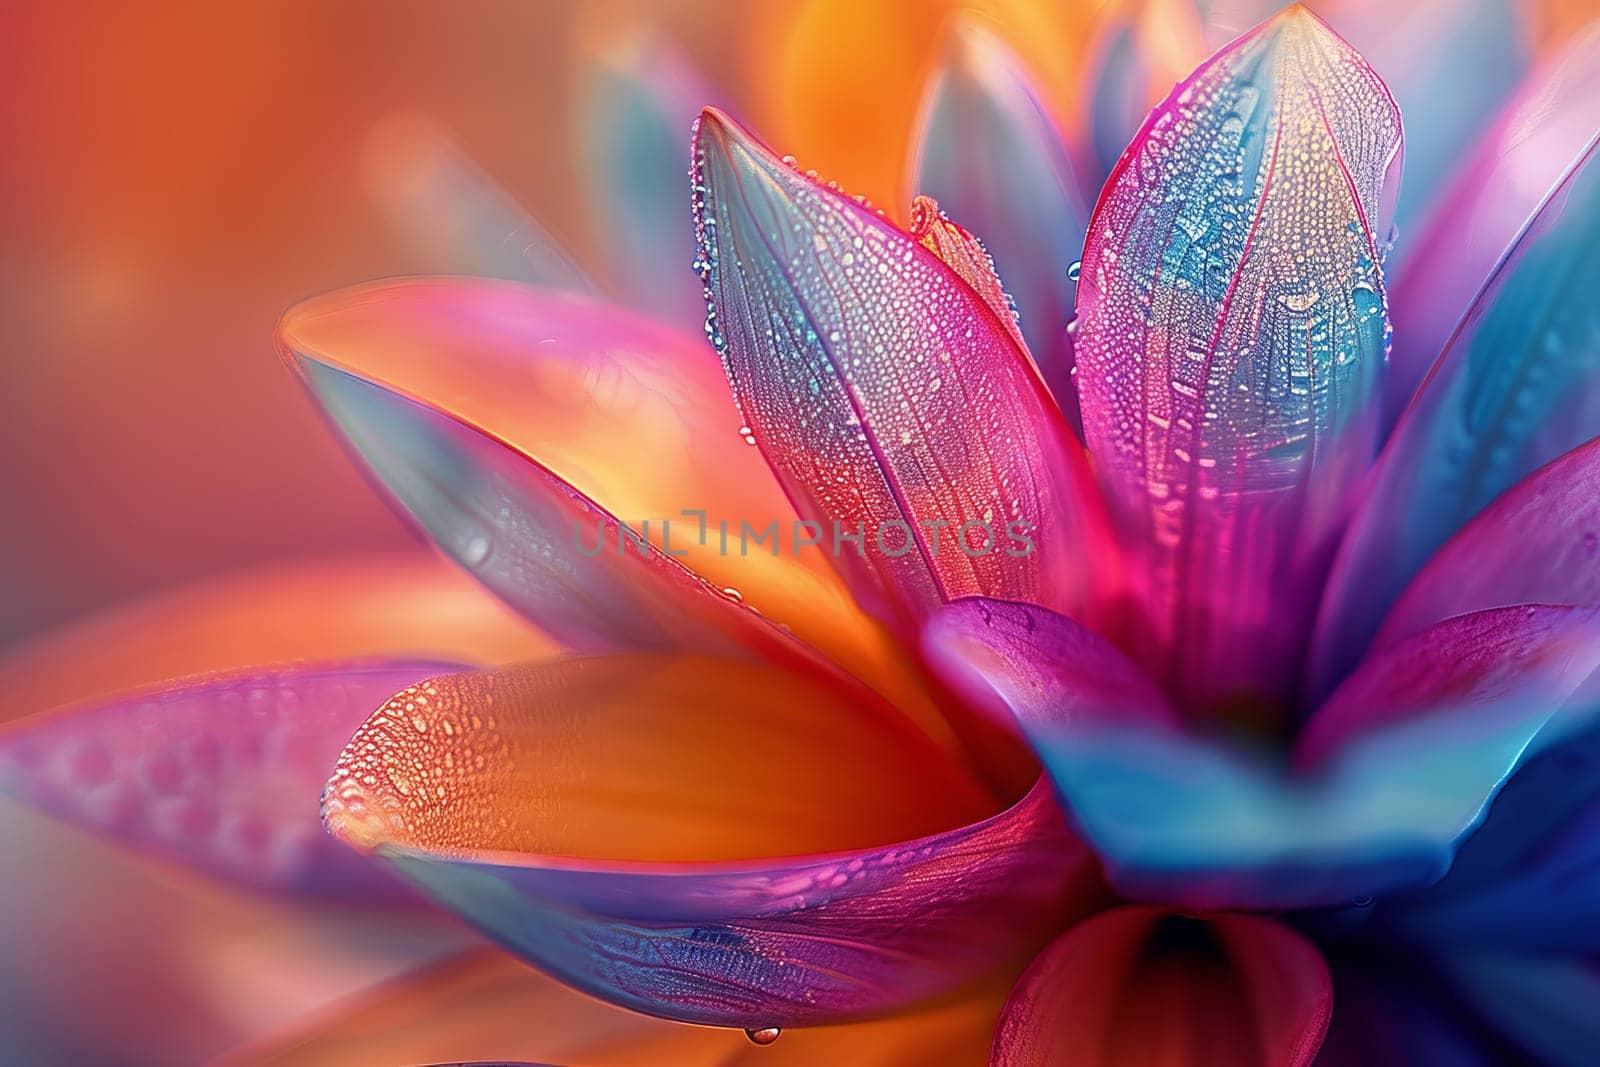 A colorful flower with droplets of water on it by itchaznong